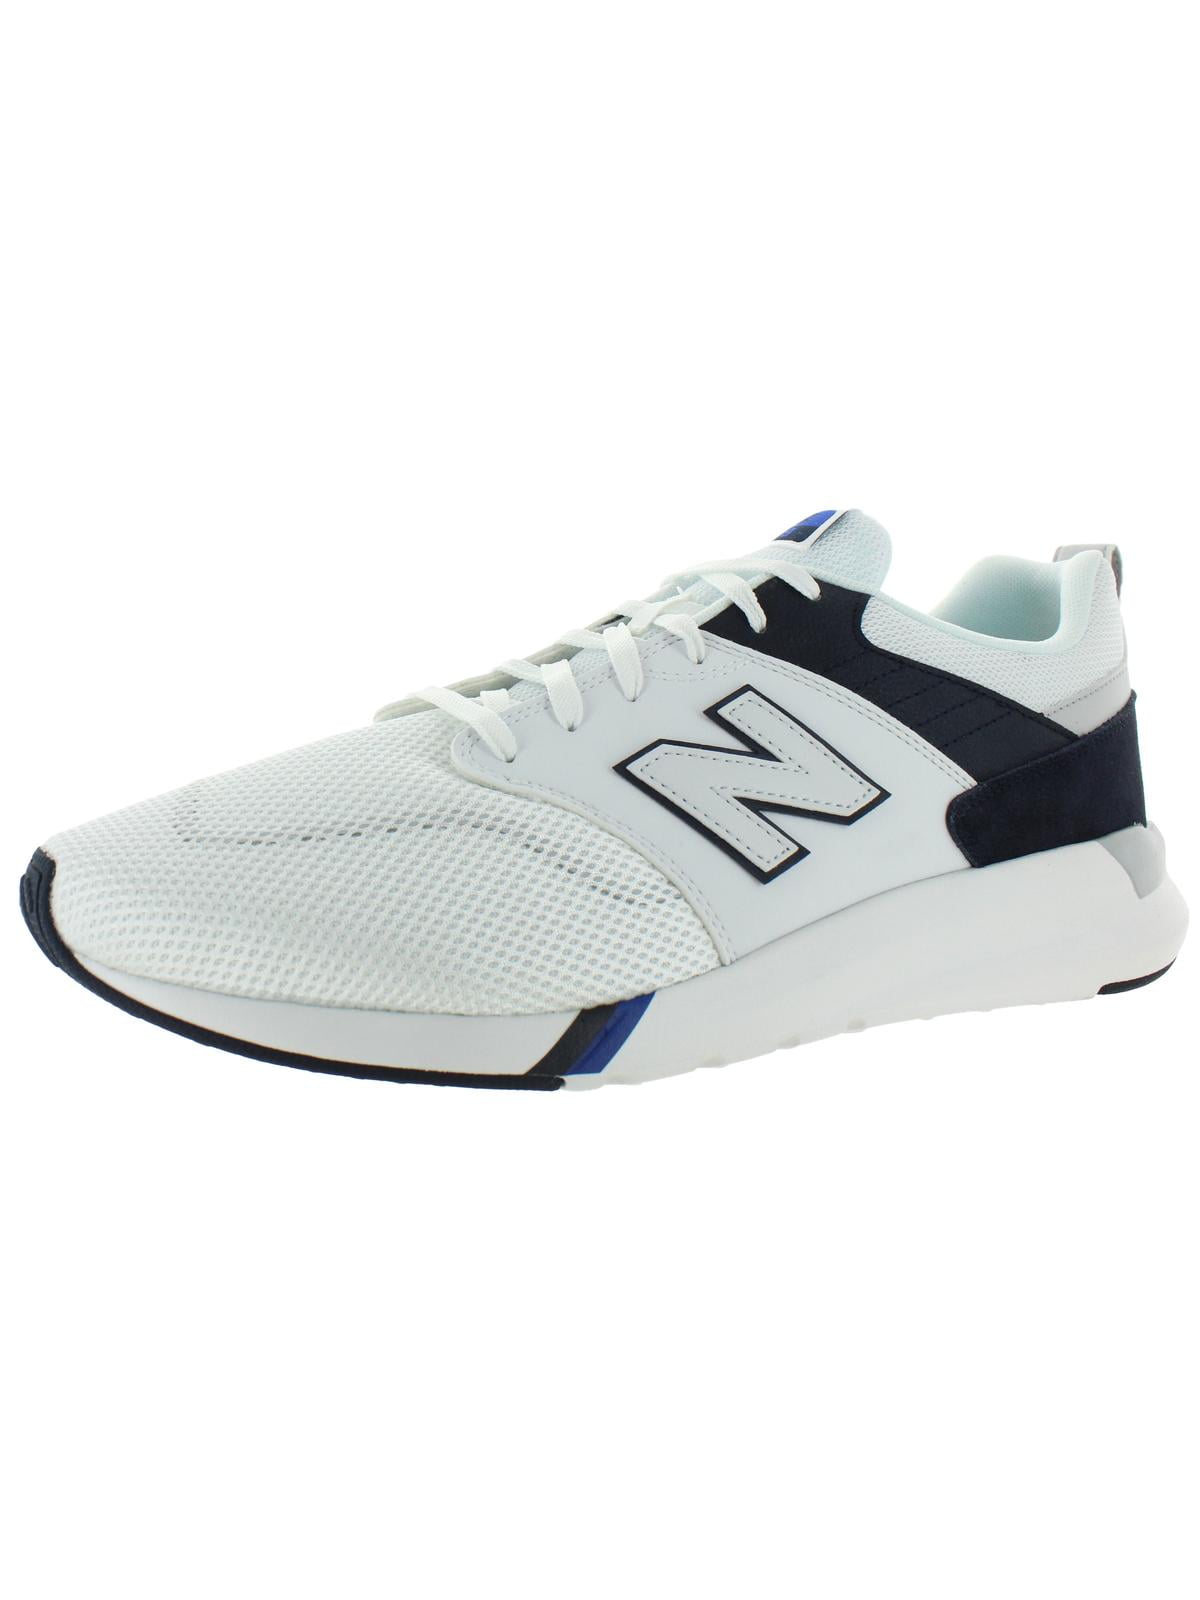 New Balance Mens 009v1 Trainers Low Top 